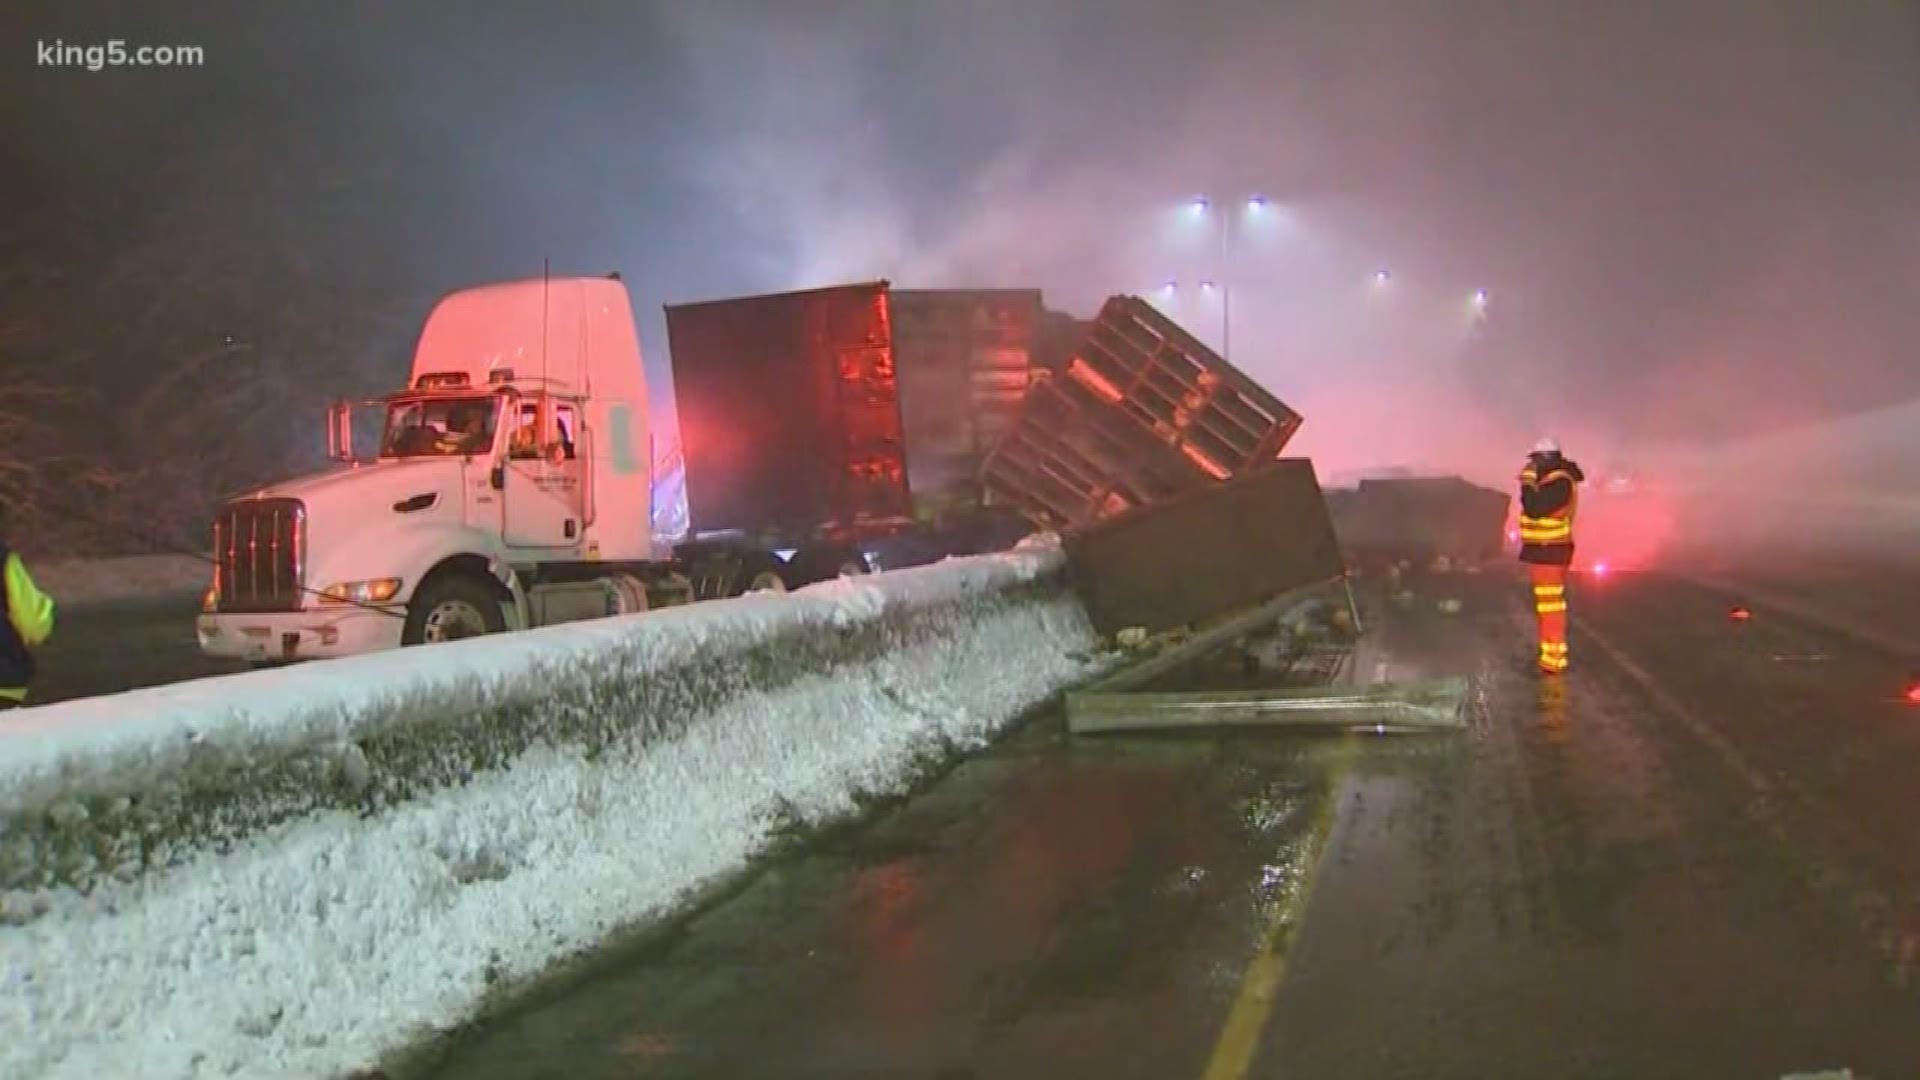 The jackknifed truck was carrying a trailer full of live chickens who got loose on the highway and had to be corralled.